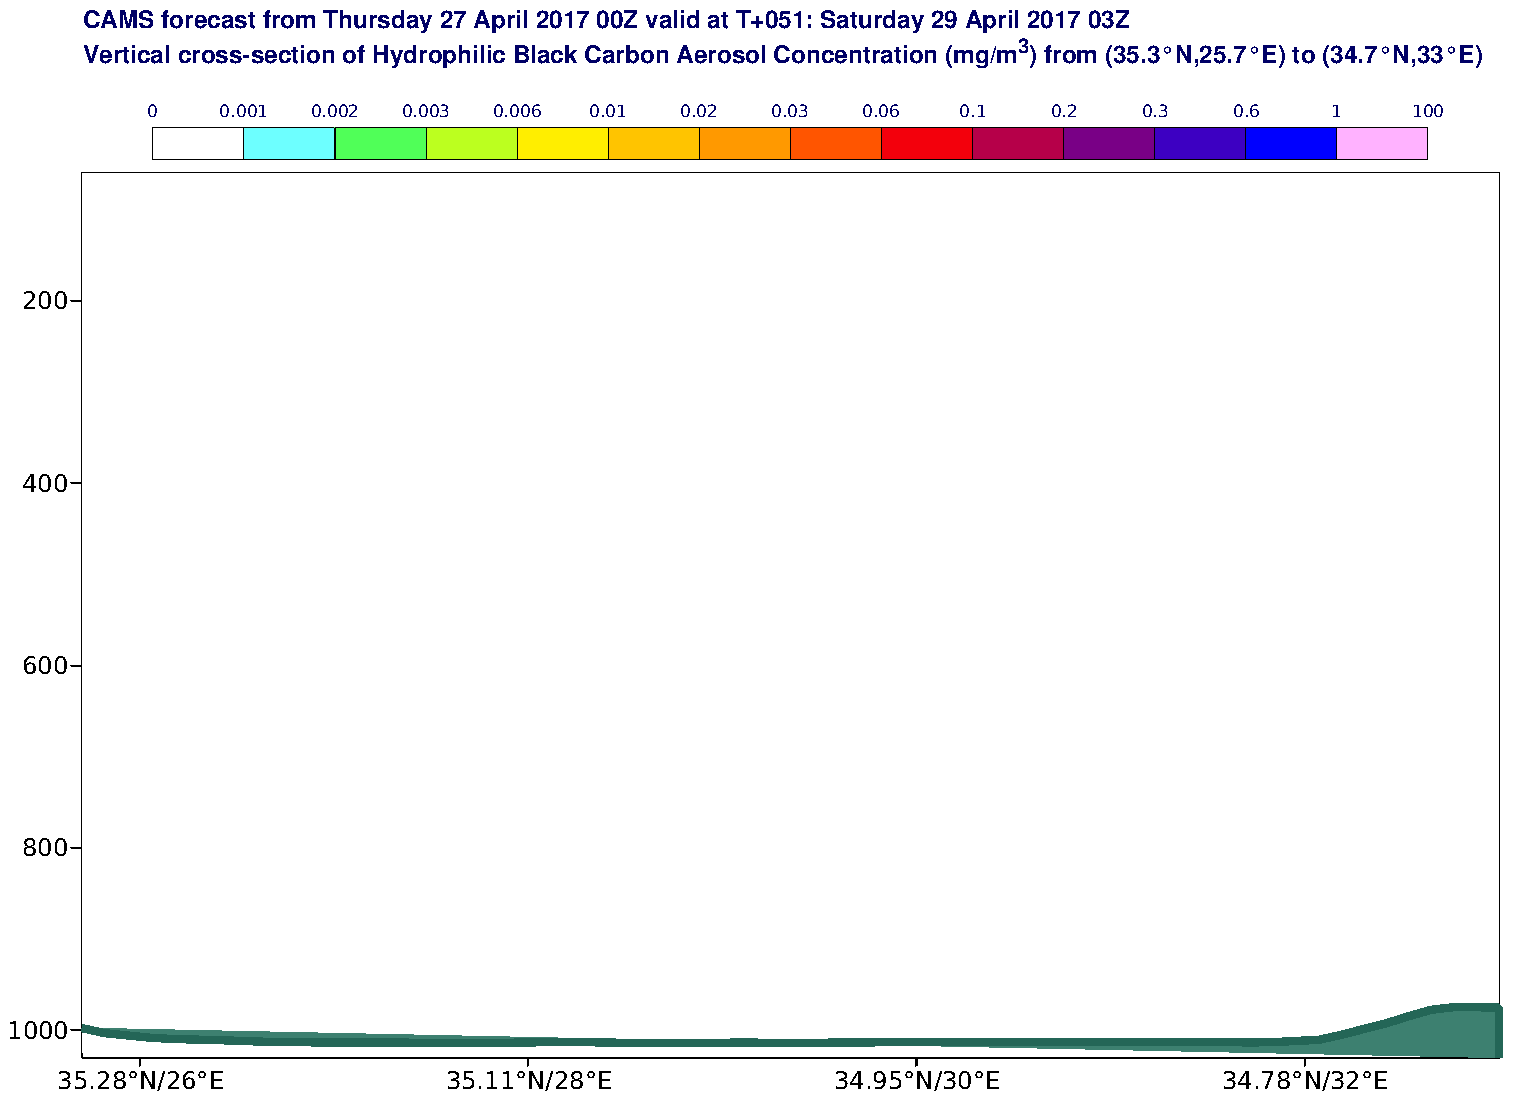 Vertical cross-section of Hydrophilic Black Carbon Aerosol Concentration (mg/m3) valid at T51 - 2017-04-29 03:00